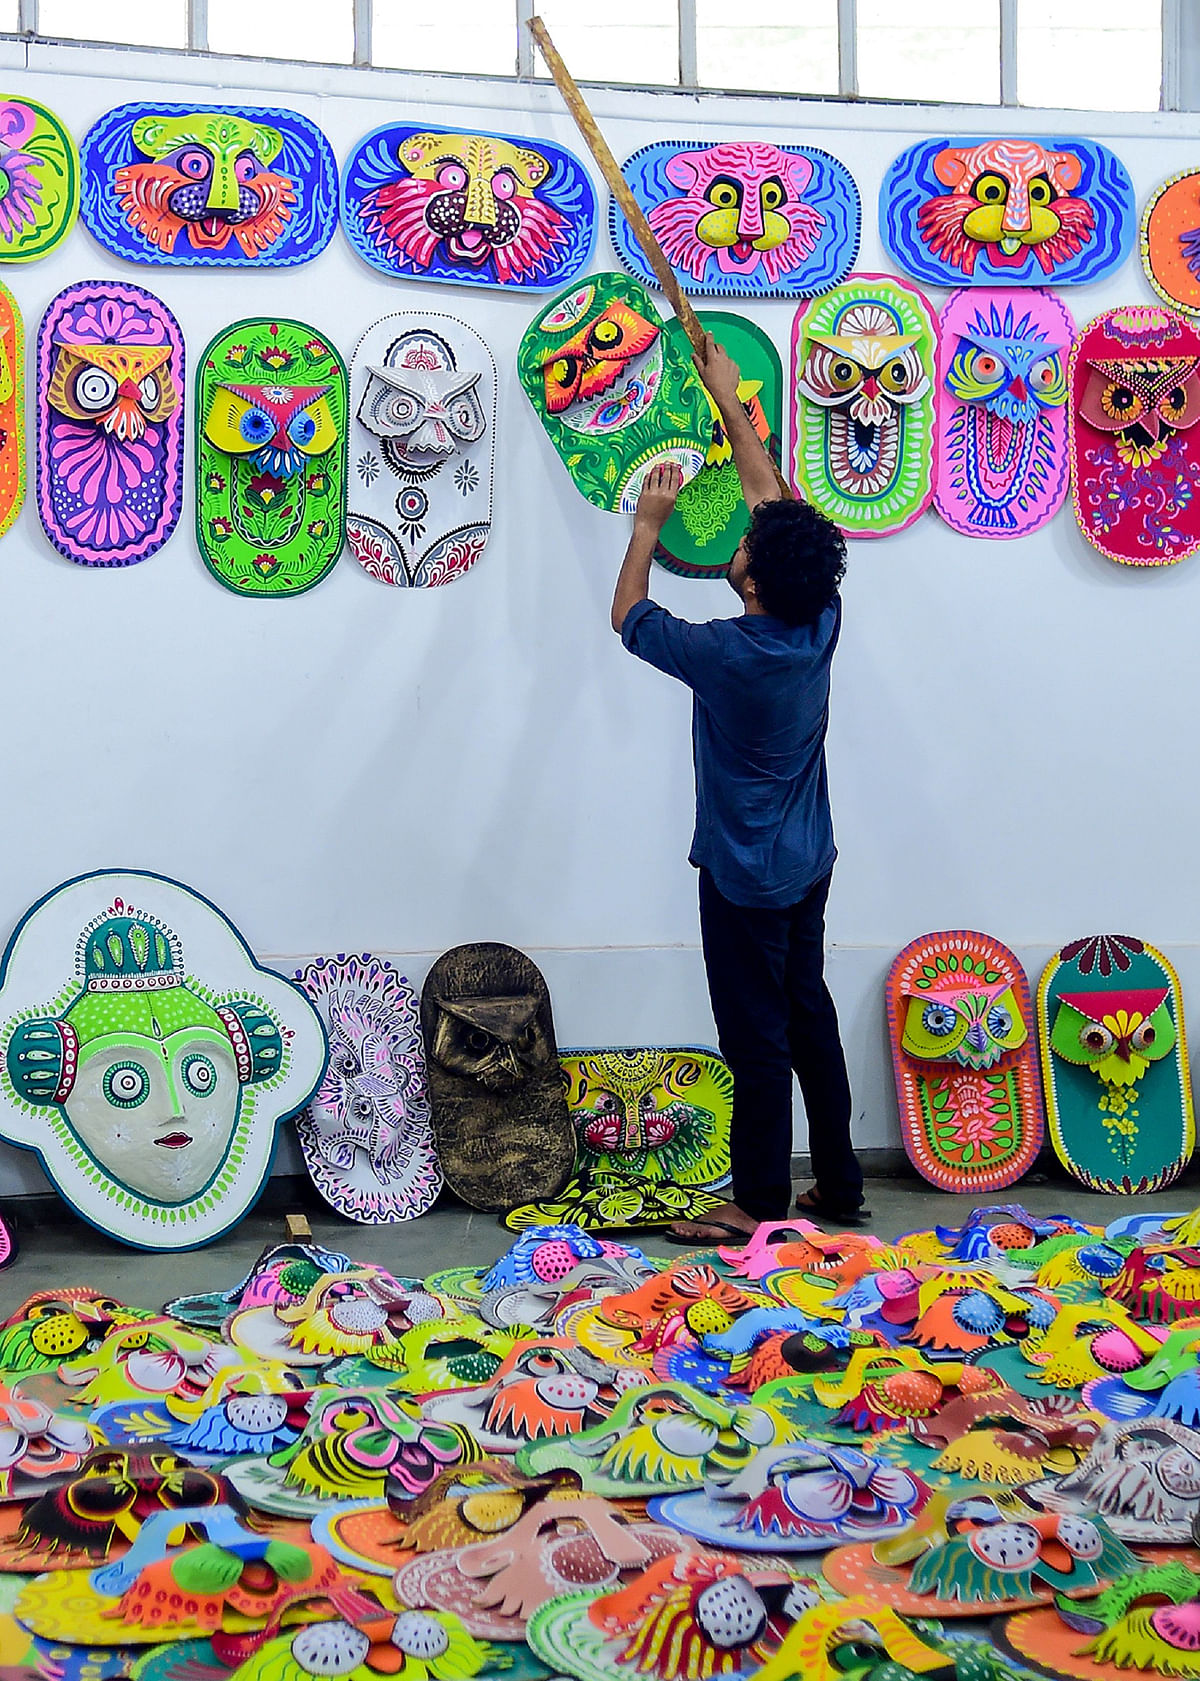 A Bangladeshi student of the Art Institute of Dhaka University hangs colourful masks for sale in preparation for the Bengali New Year celebration, in Dhaka on 7 April 2019. Photo: AFP